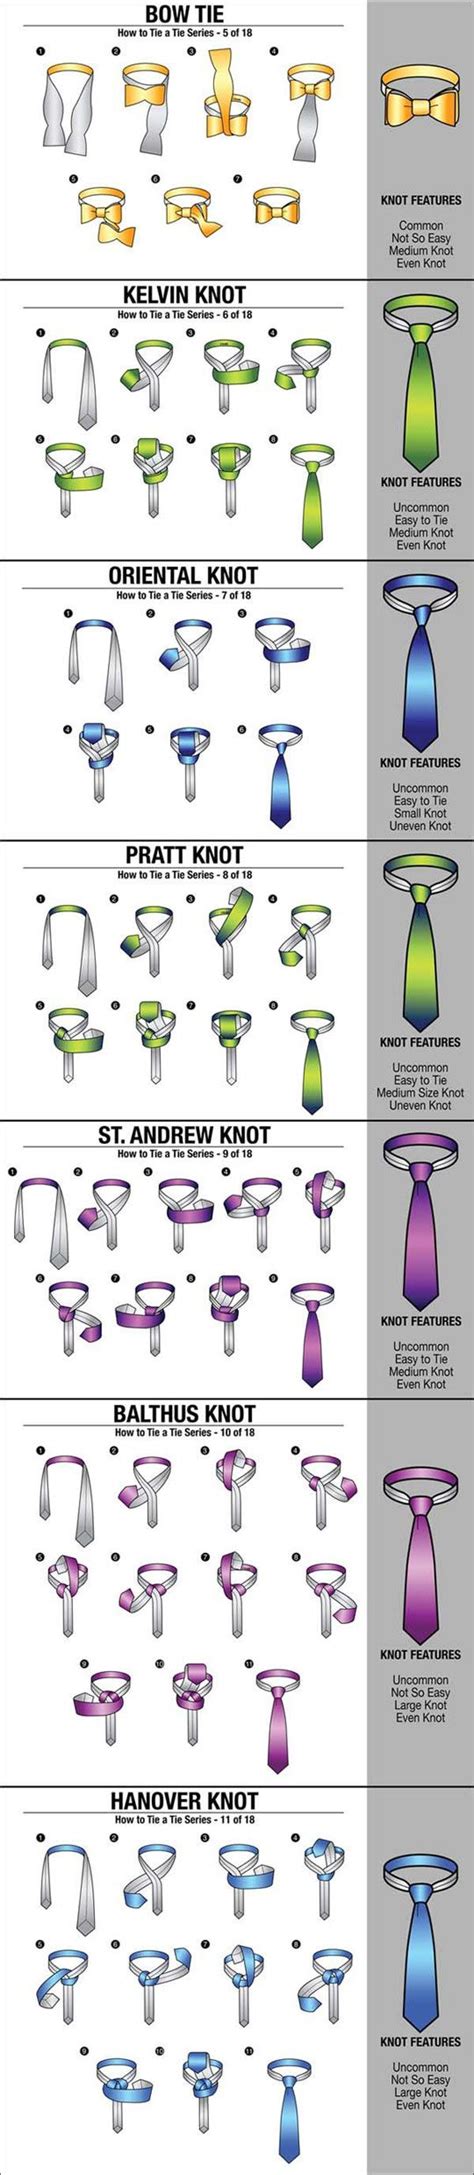 neck tie knot porn sfw life hacks clothes and stuffing